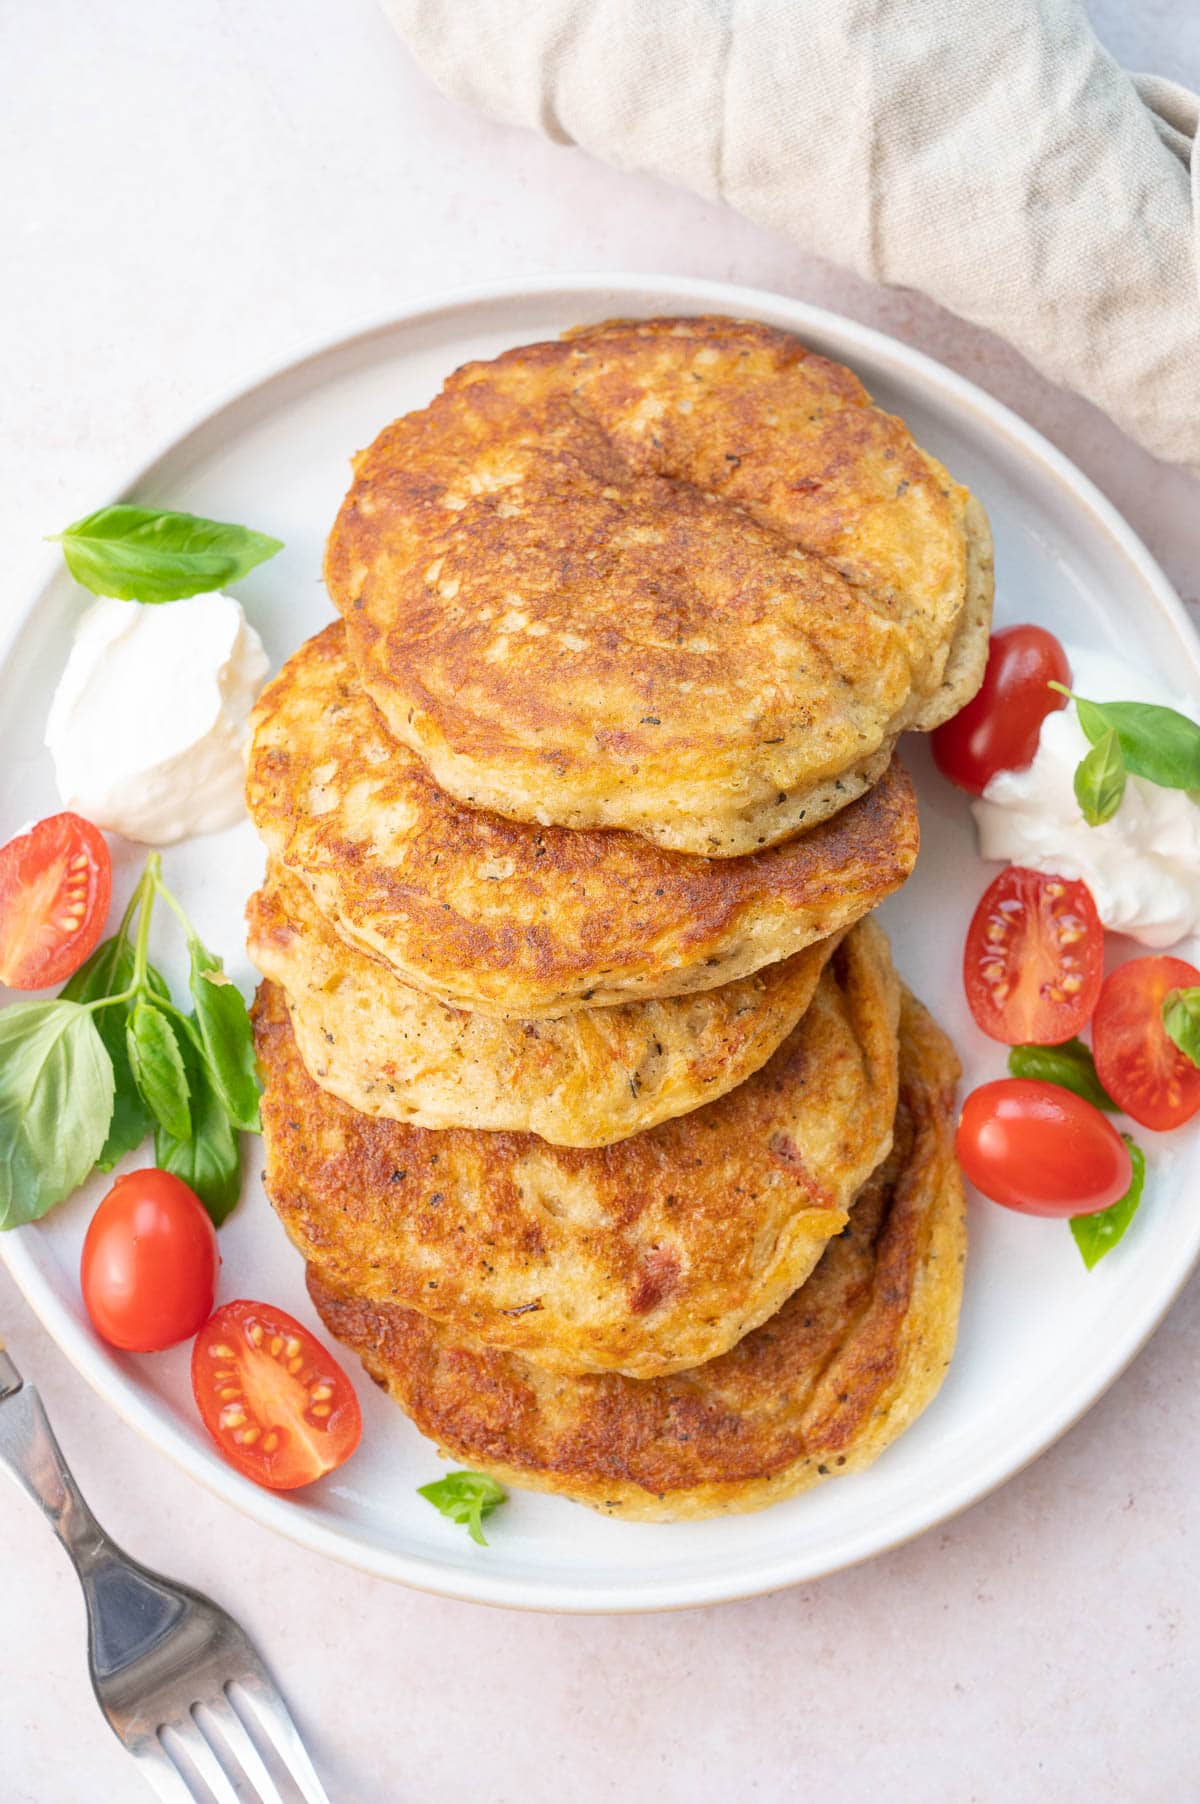 Savory Pancakes on a white plate served with cherry tomatoes, basil, and yogurt.